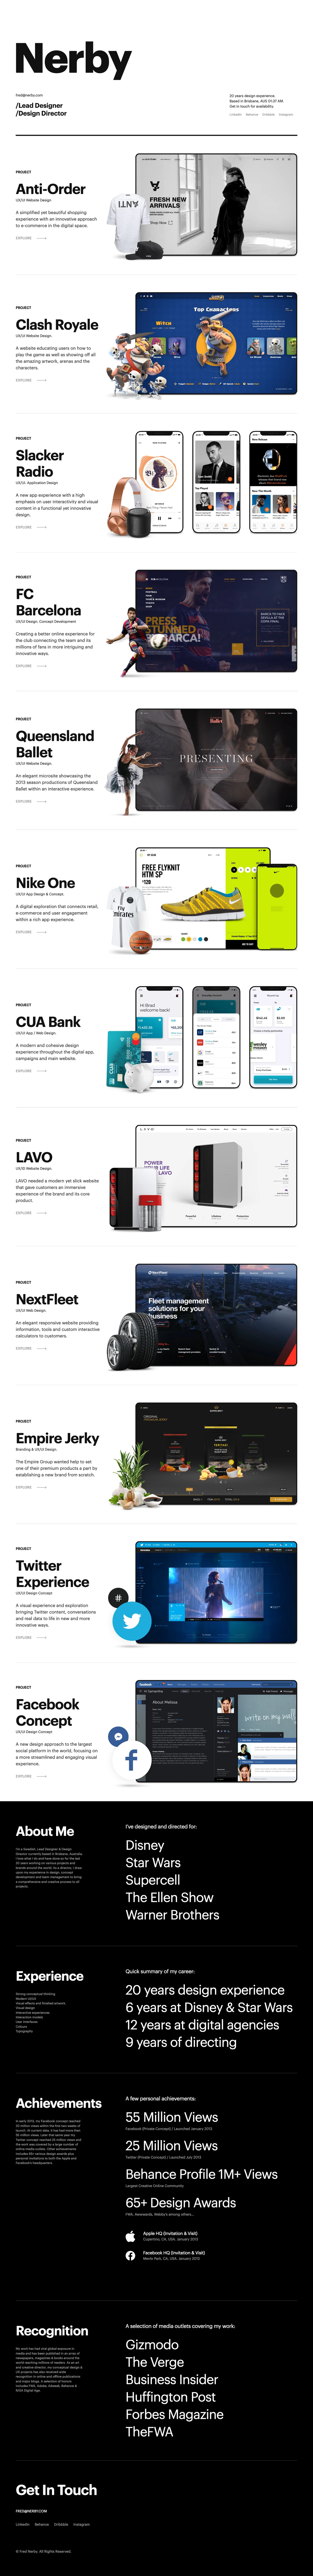 Fred Nerby Landing Page Example: Lead Designer & Design Director. 20 years design experience. Based in Brisbane.